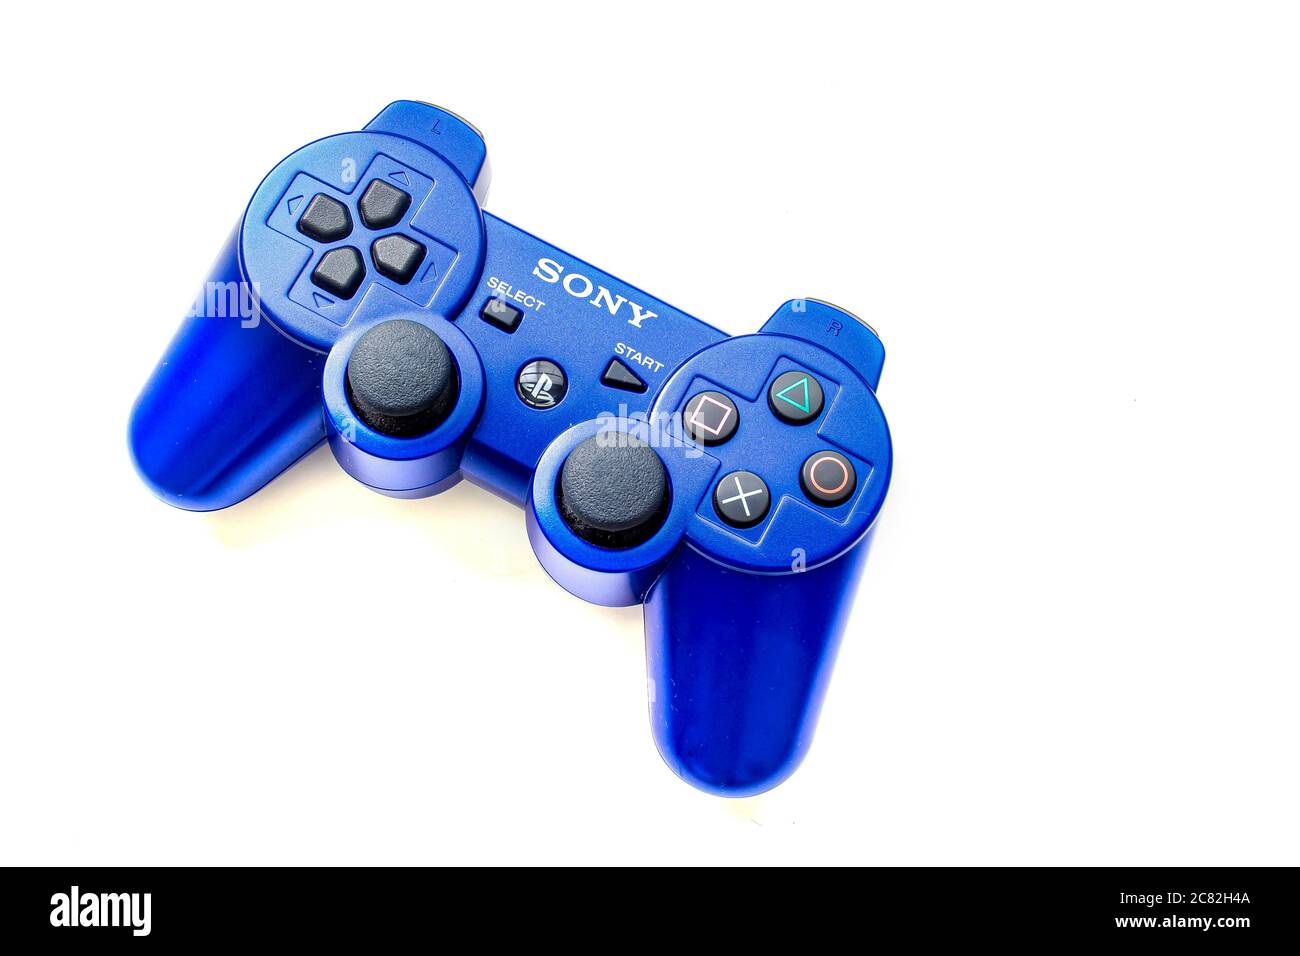 Calgary, Alberta, Canada. July 20, 2020. Blue Sony Play Station control remote on a white background Stock Photo